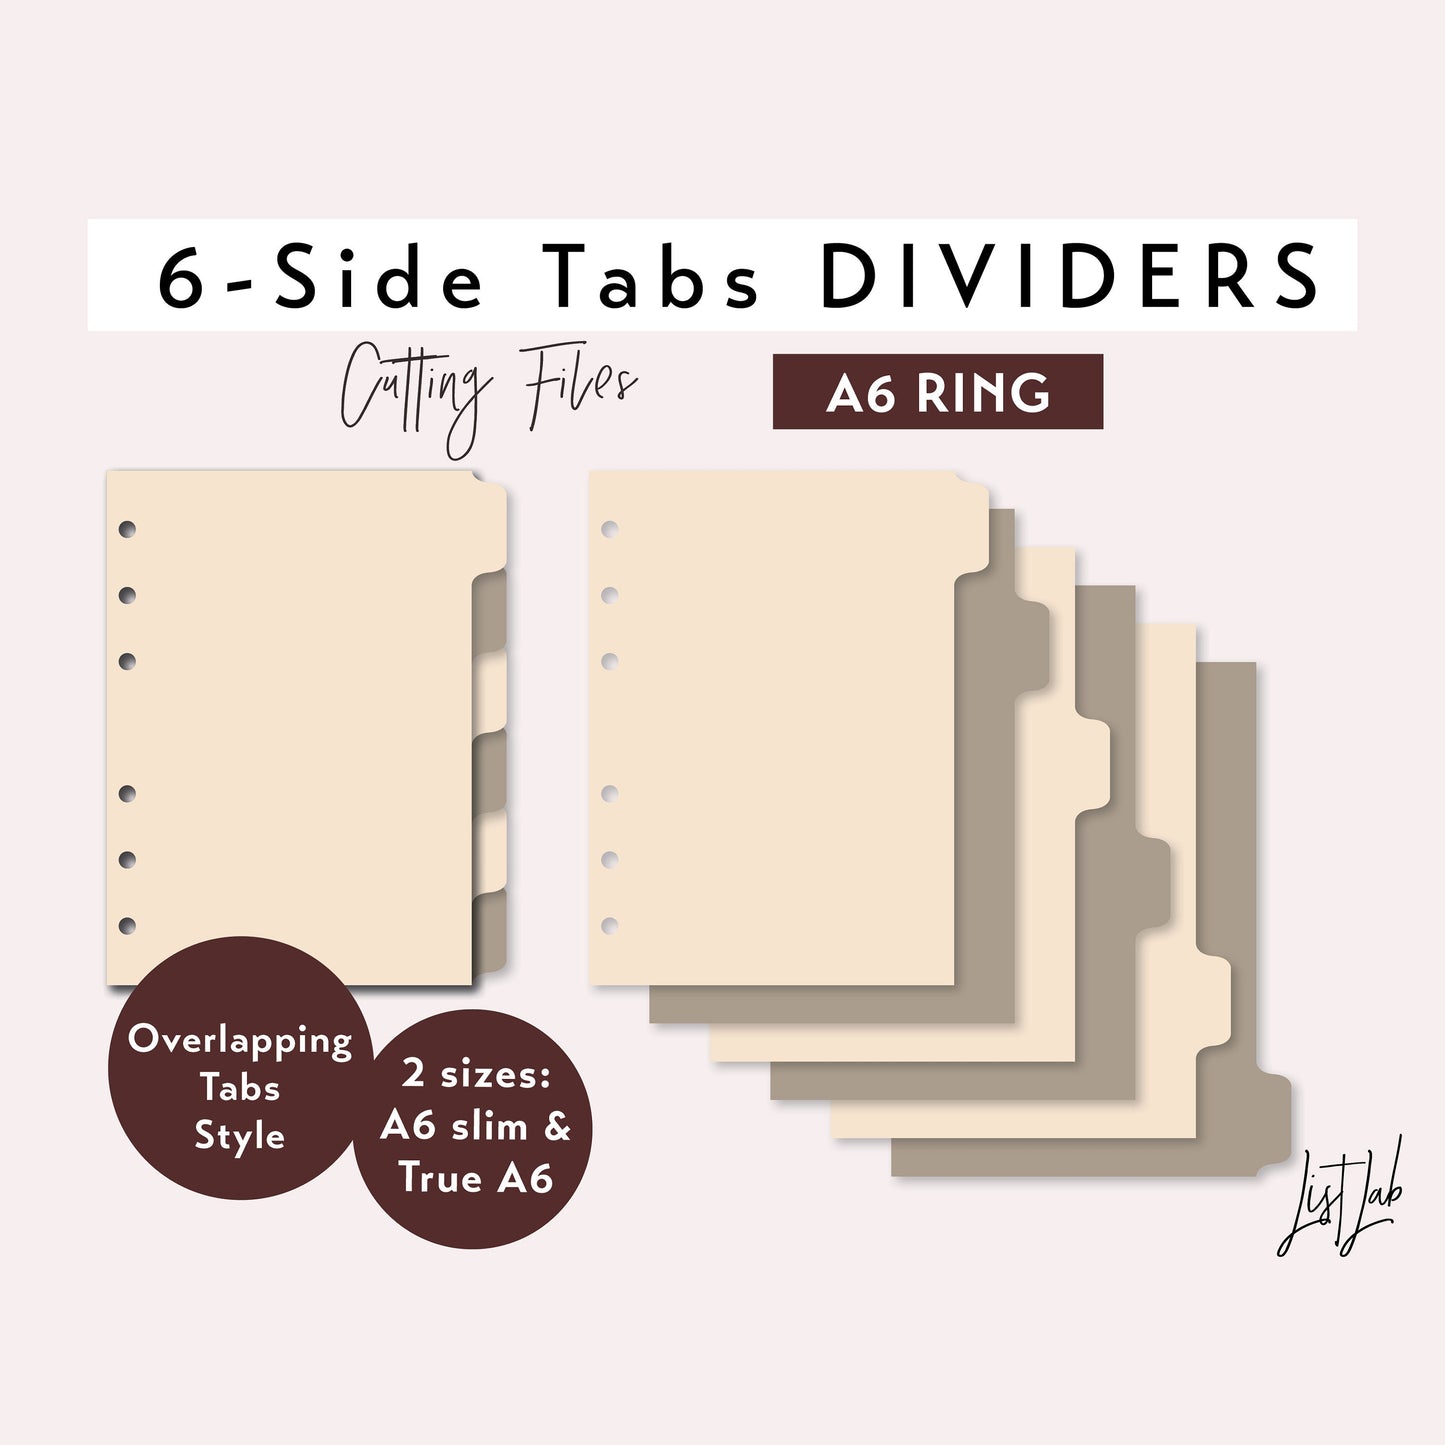 A6 Ring size 6 SIDE Tab Dividers Cutting Files Set